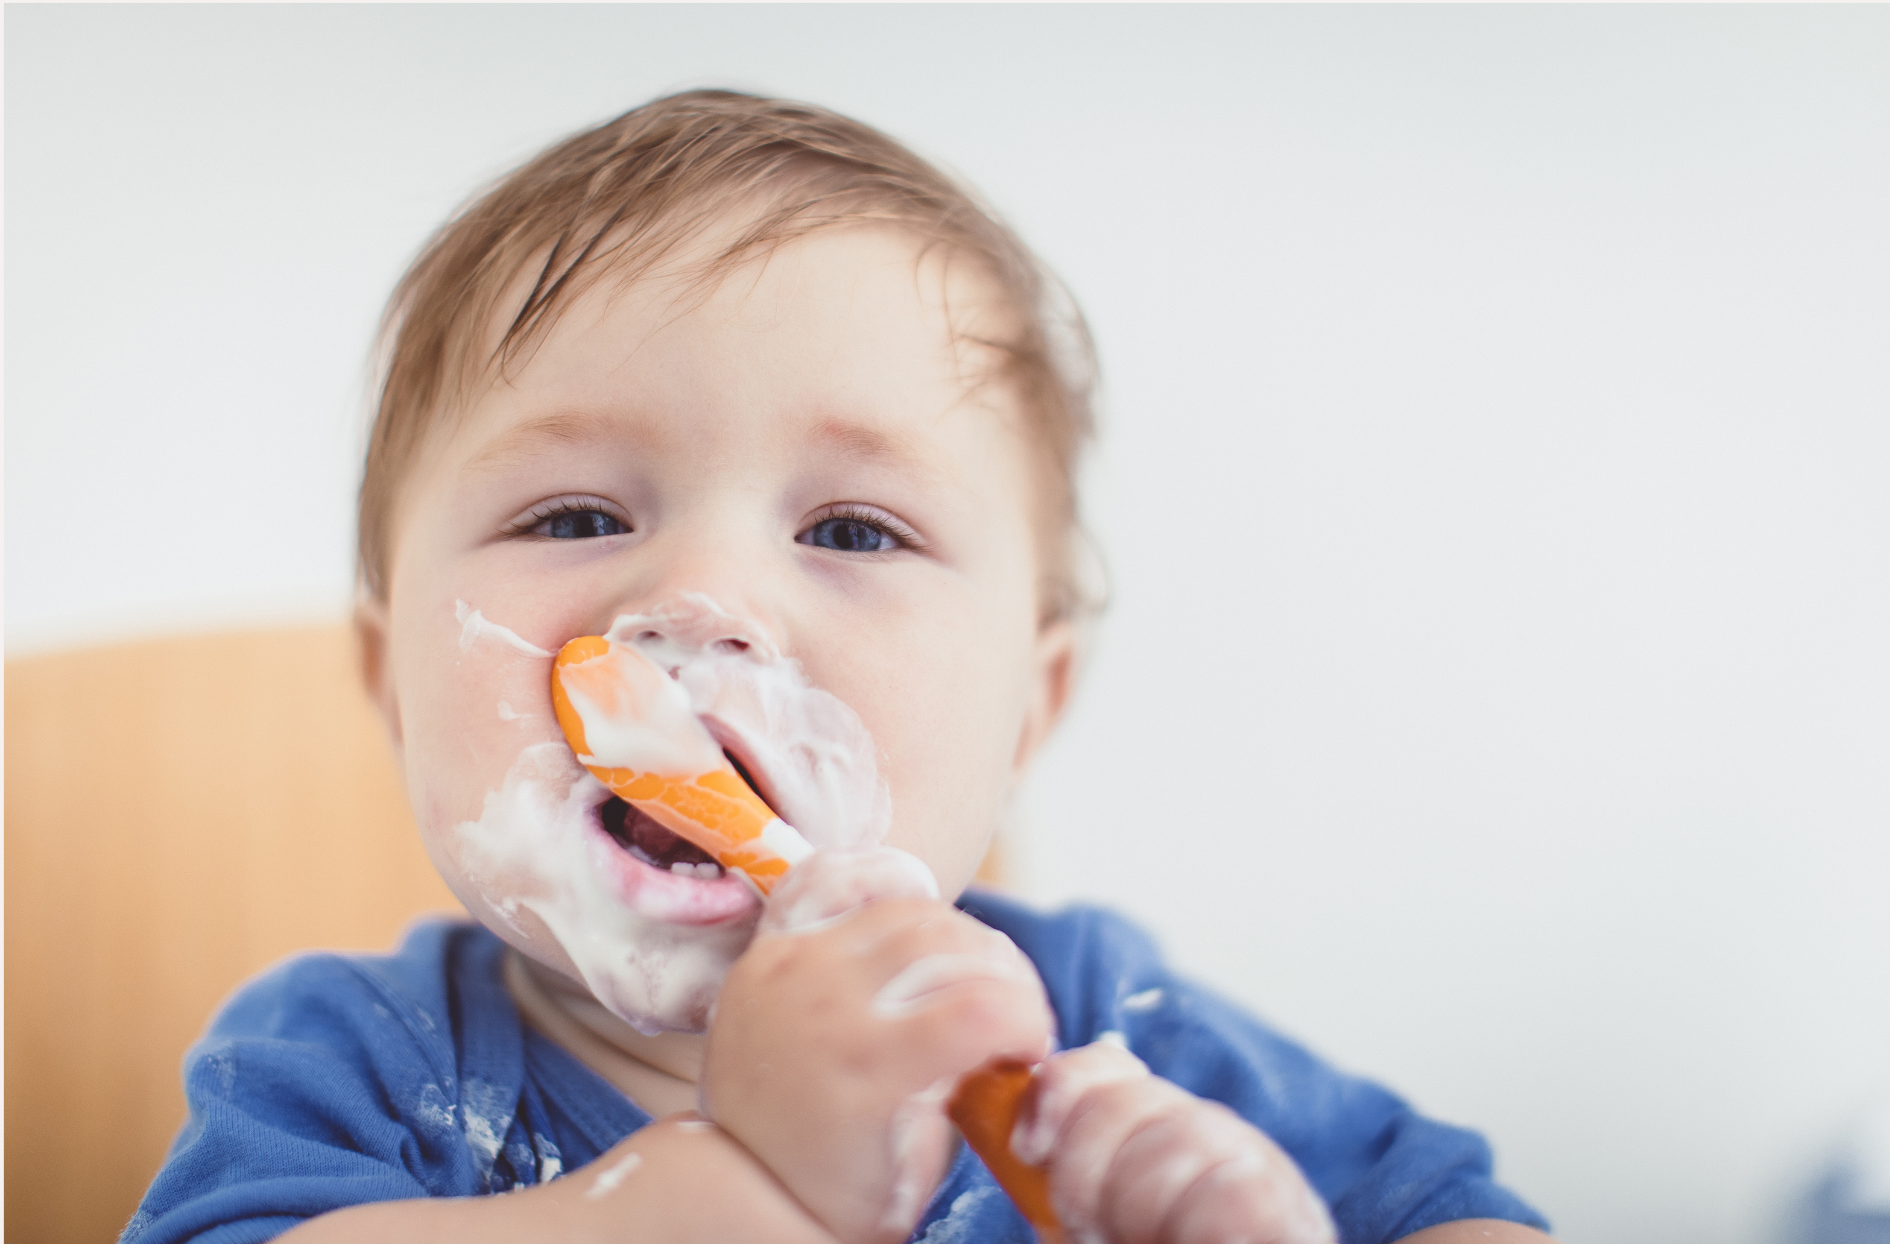 In the photo, a baby sits in a high chair, holding a spoon with one hand and enjoy eating yogurt. His face is adorned with yogurt, evident in the messy but joyful traces around his mouth and cheeks.